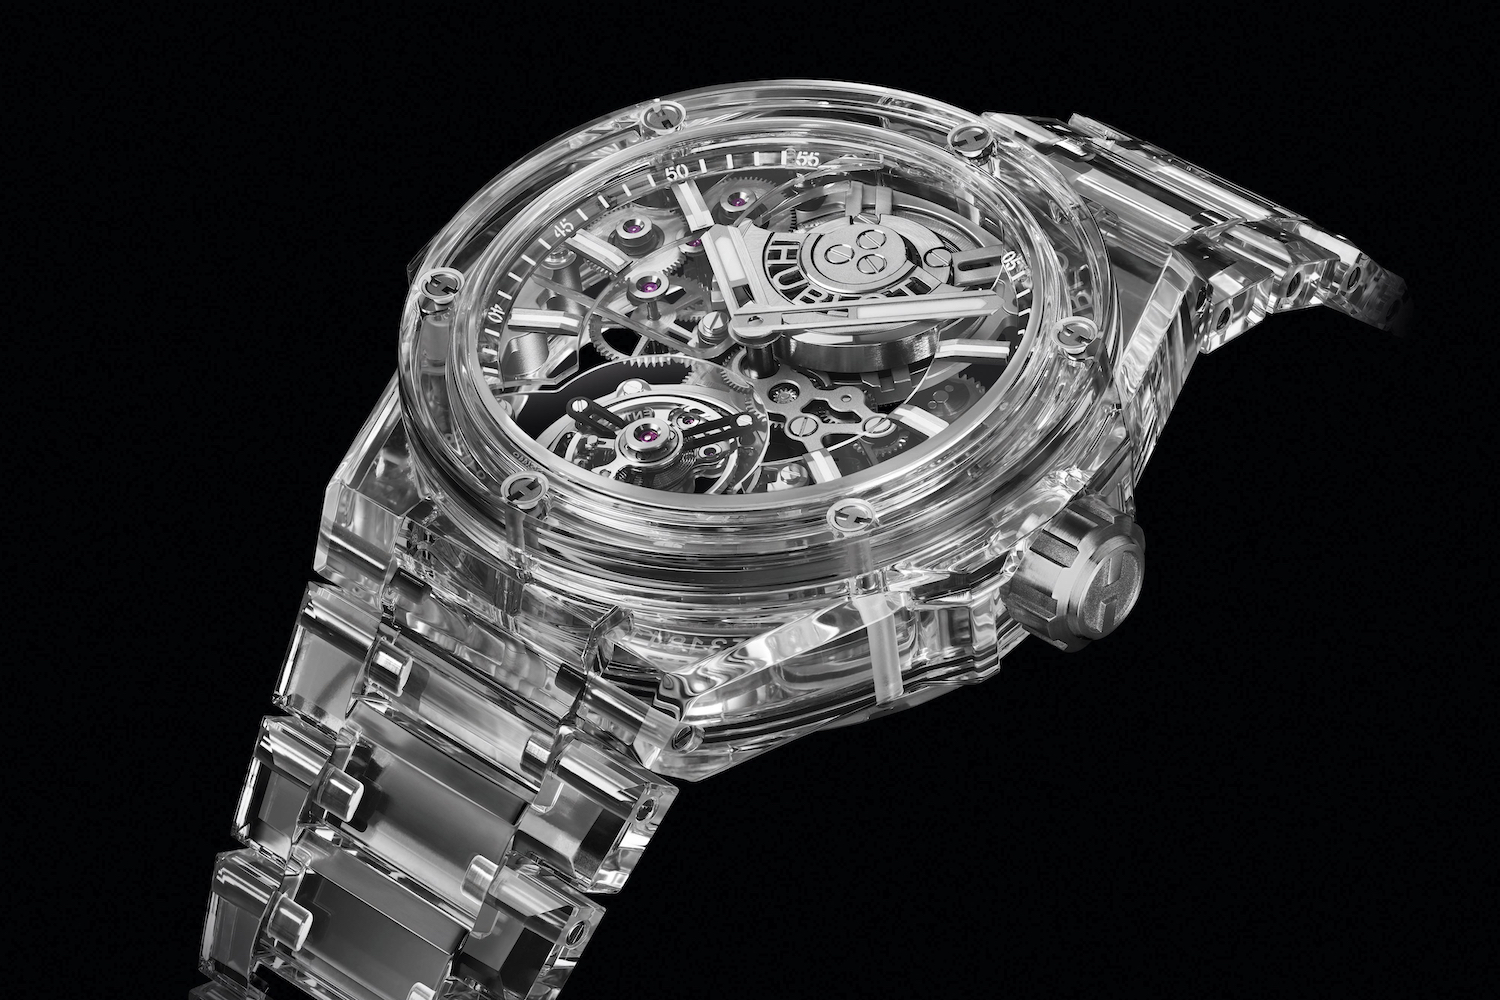 The Amazing Inside Story of Hublot's All-Sapphire Watch